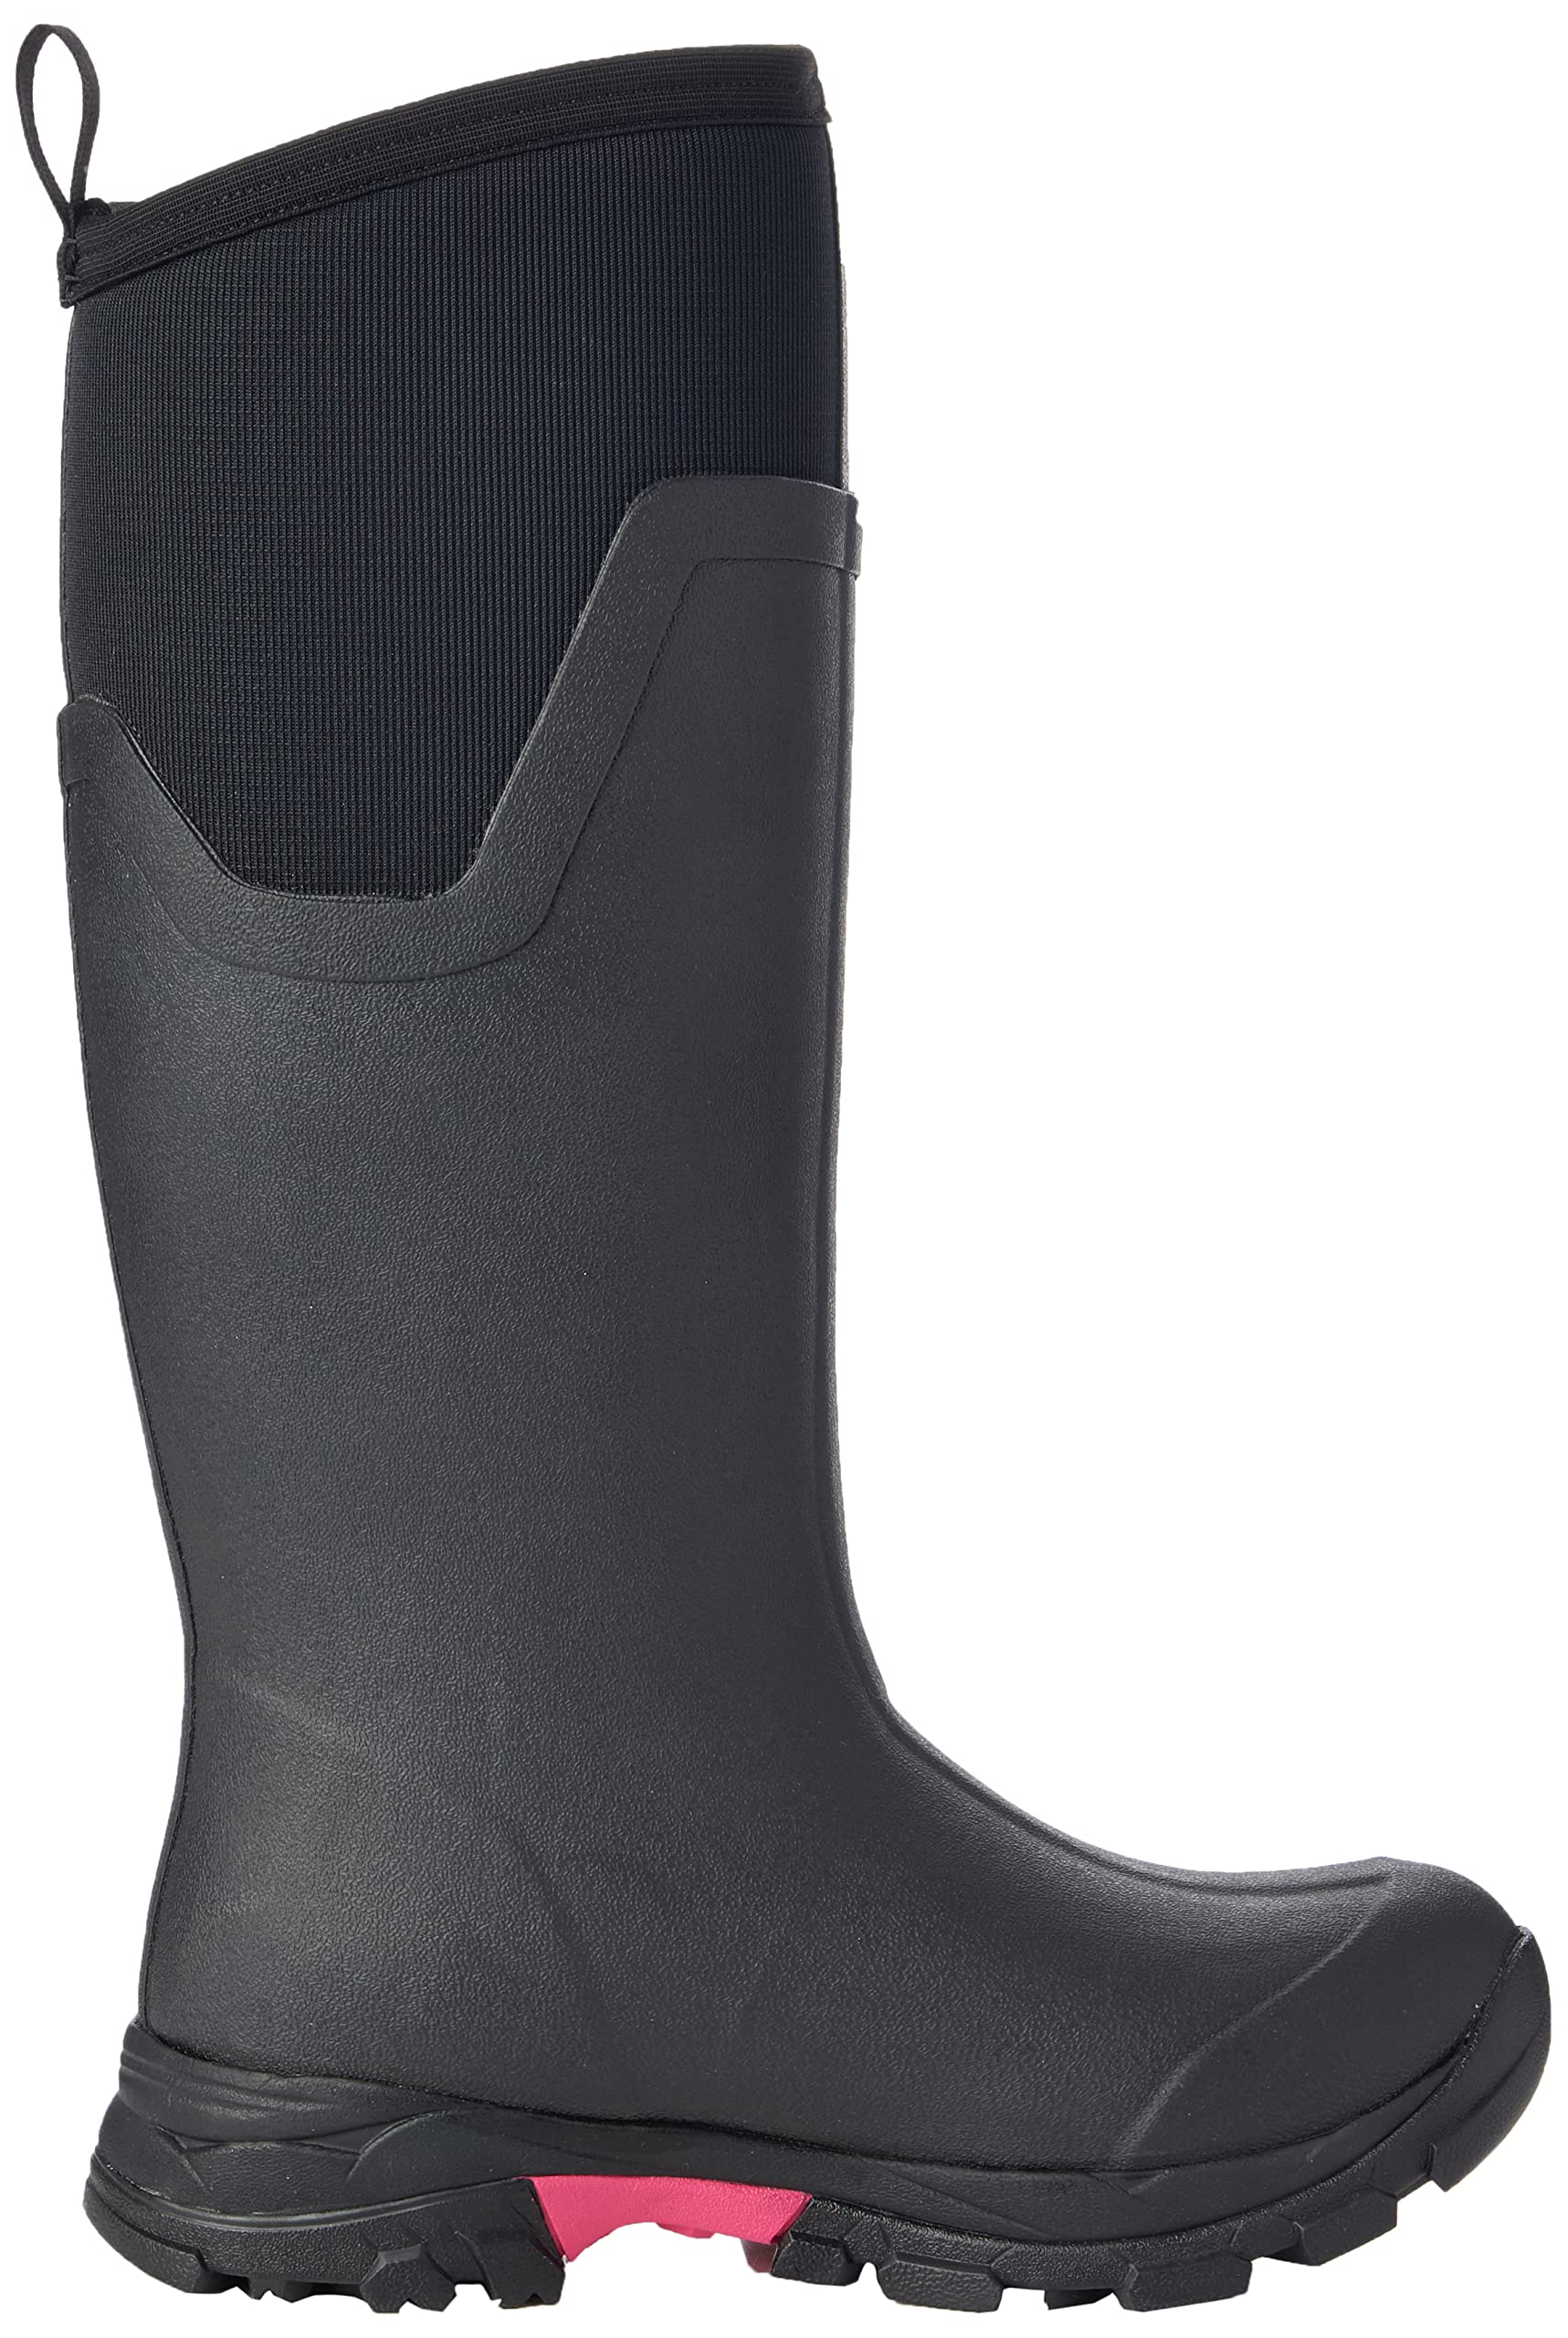 Muck Boot Women's Wellington Boots Arctic Ice Tall AGAT (Replaced AS2TV-600)